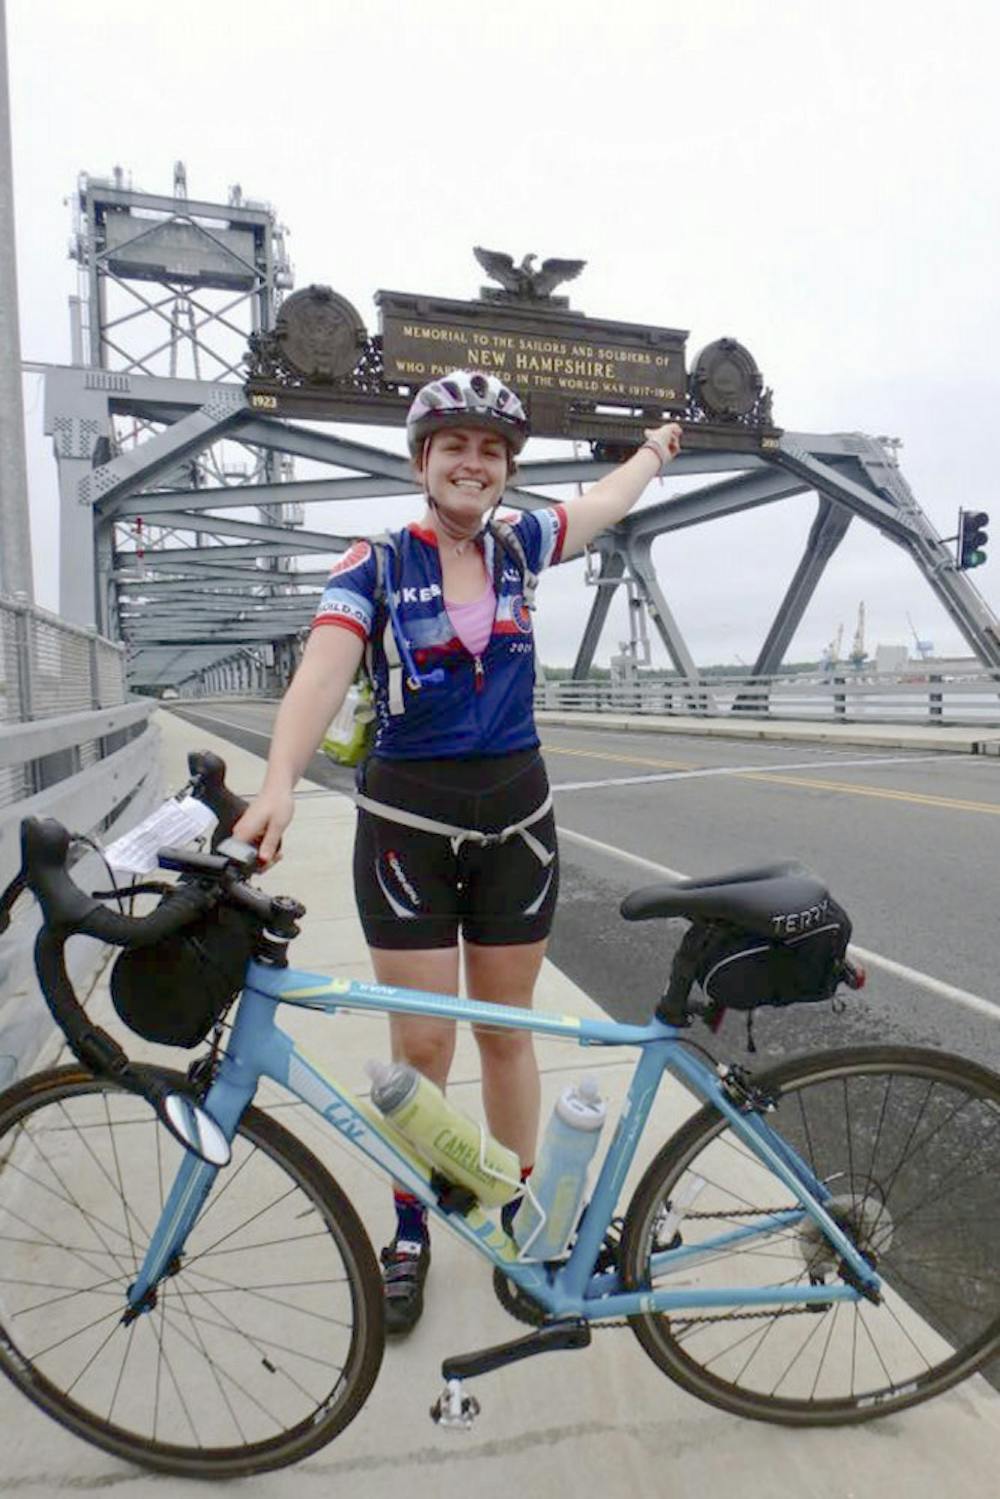 <p>Bridget Anderson, a 22-year-old UF graduate, stands on the World War I Memorial Bridge in Portsmouth, New Hampshire, during her bike trip across the country. Another UF alum, 25-year-old Patrick Wanninkhof, died during the trip in a car accident when he and Anderson were hit by a distracted driver.</p>